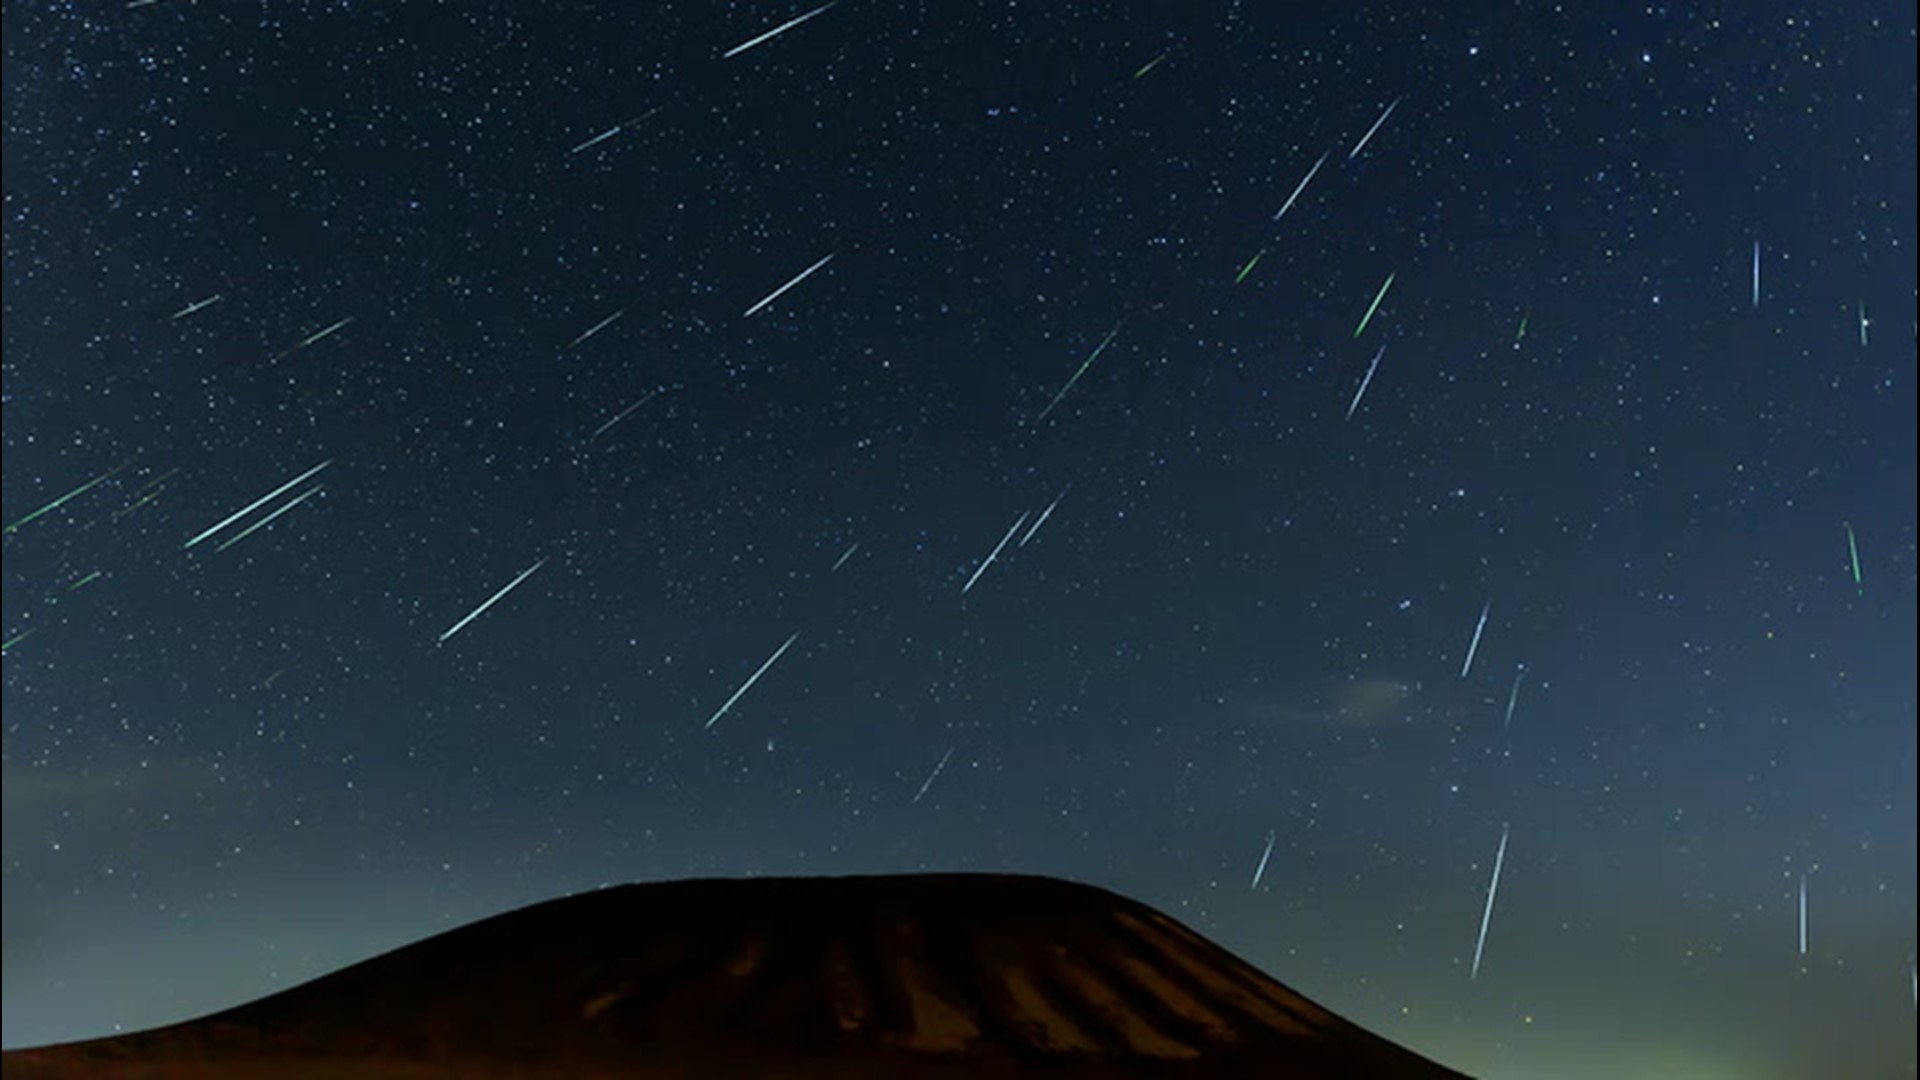 The Eta Aquarid meteor shower will peak on the night of May 4-5. Although it favors the Southern Hemisphere, folks living in the Northern Hemisphere can still enjoy shooting stars.